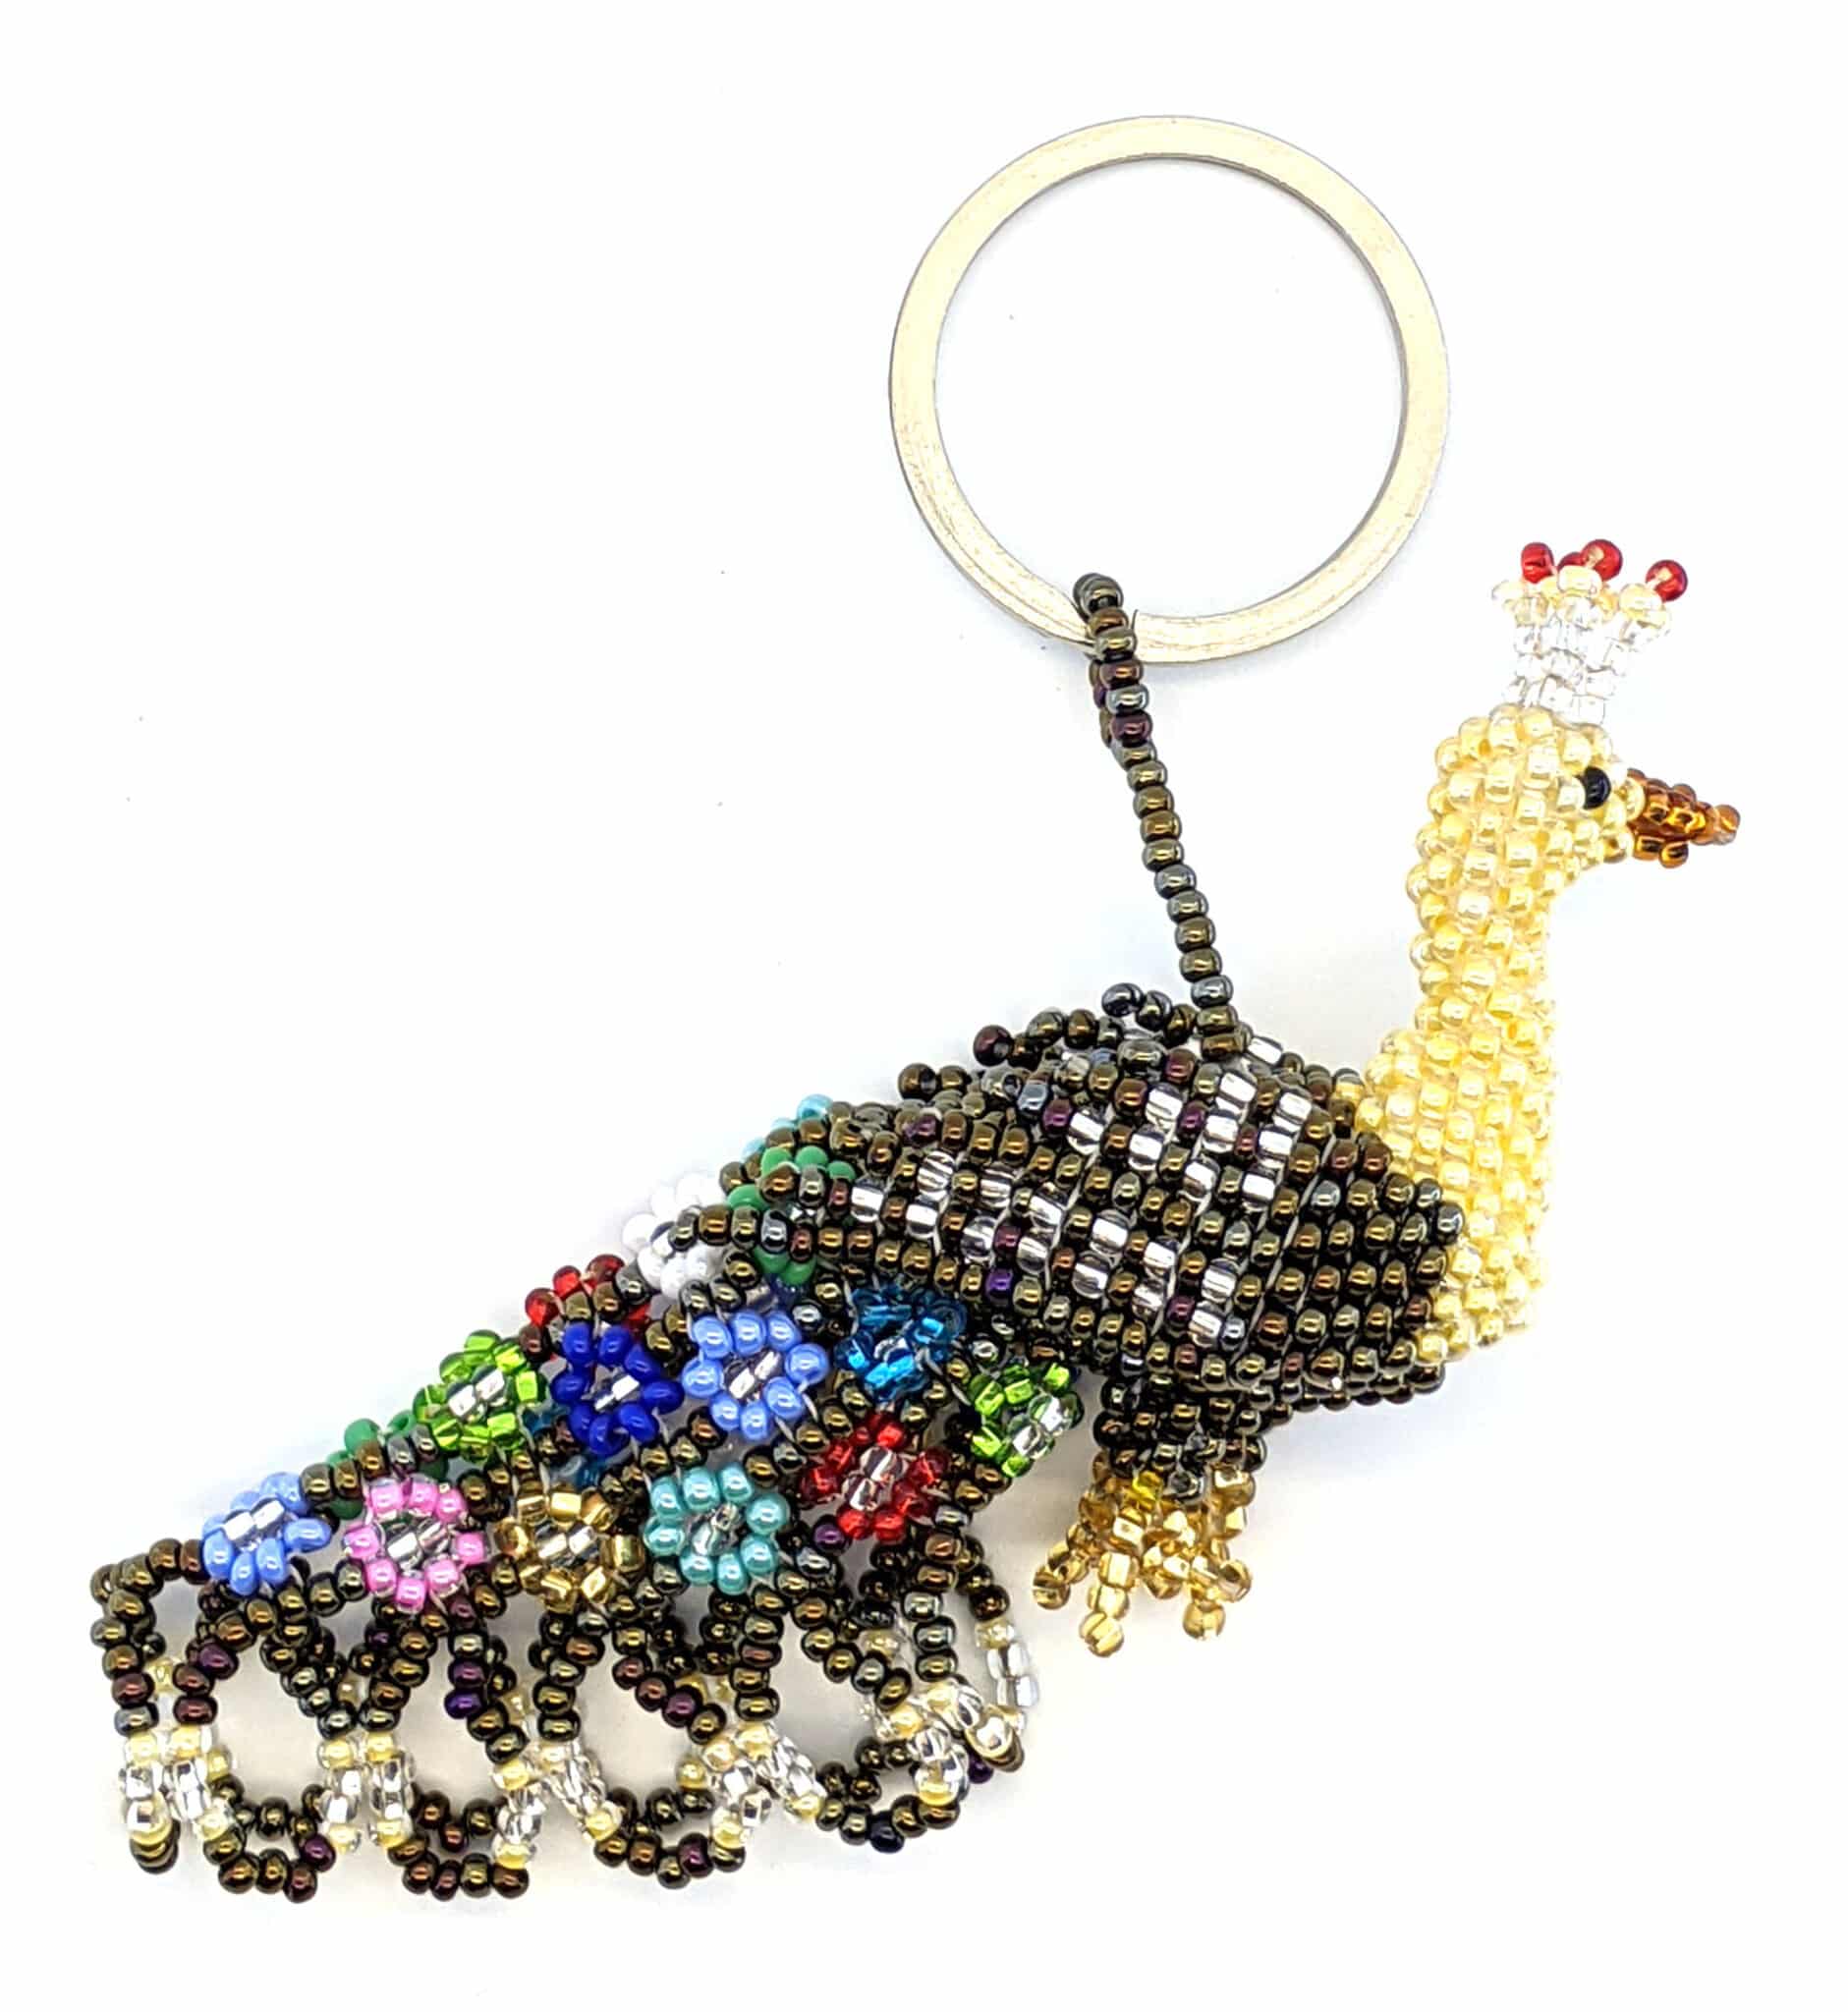 Peacock Beaded Ornament - Brown and Cream